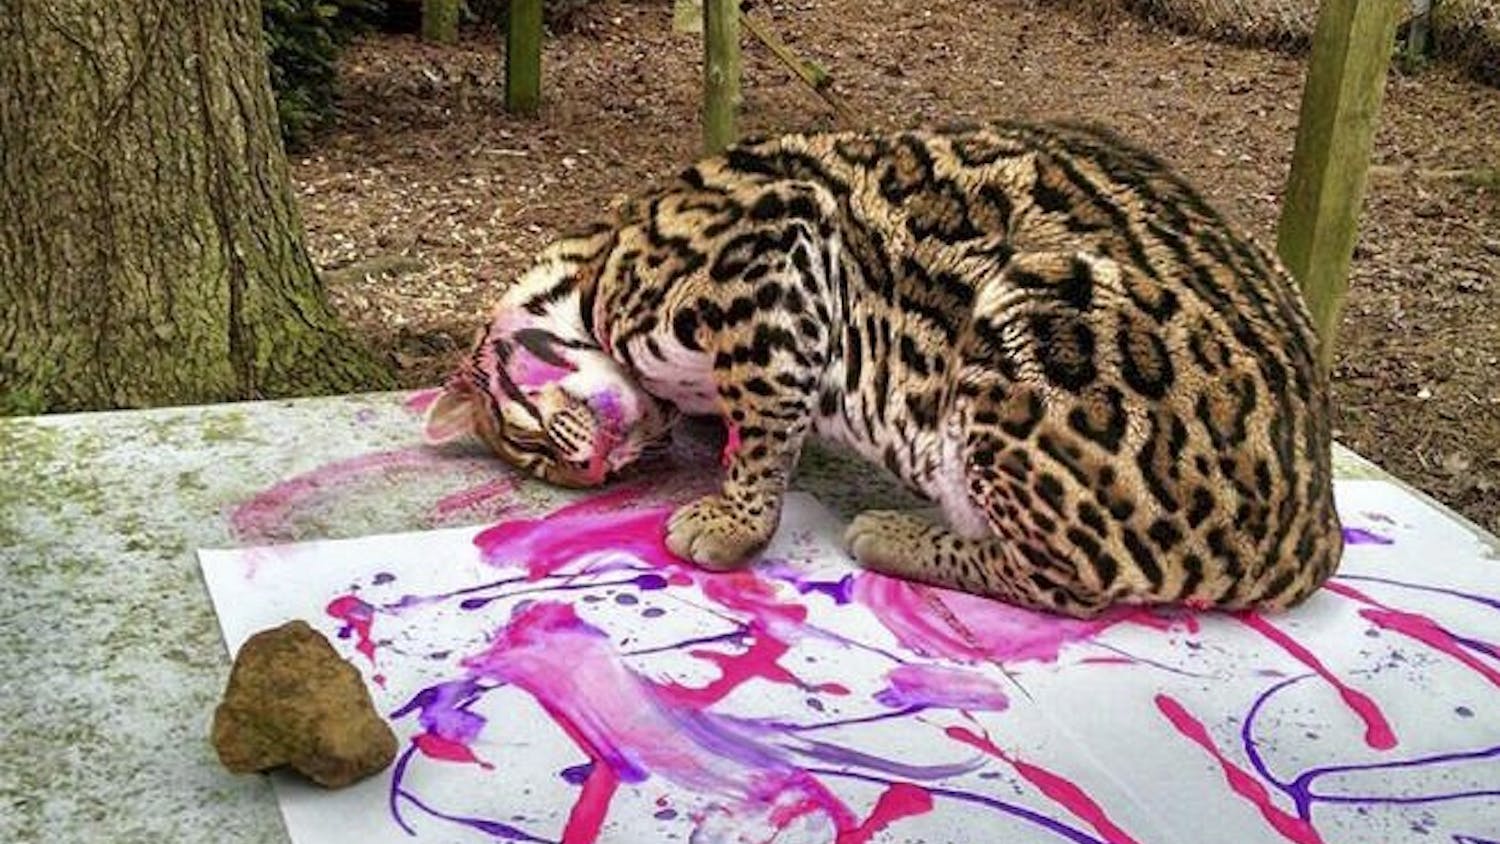 Petee Ocelot paints with purple and pink egg-based tempera at Carolina Tiger Rescue in Pittsboro. (Courtesy of Carolina Tiger Rescue)